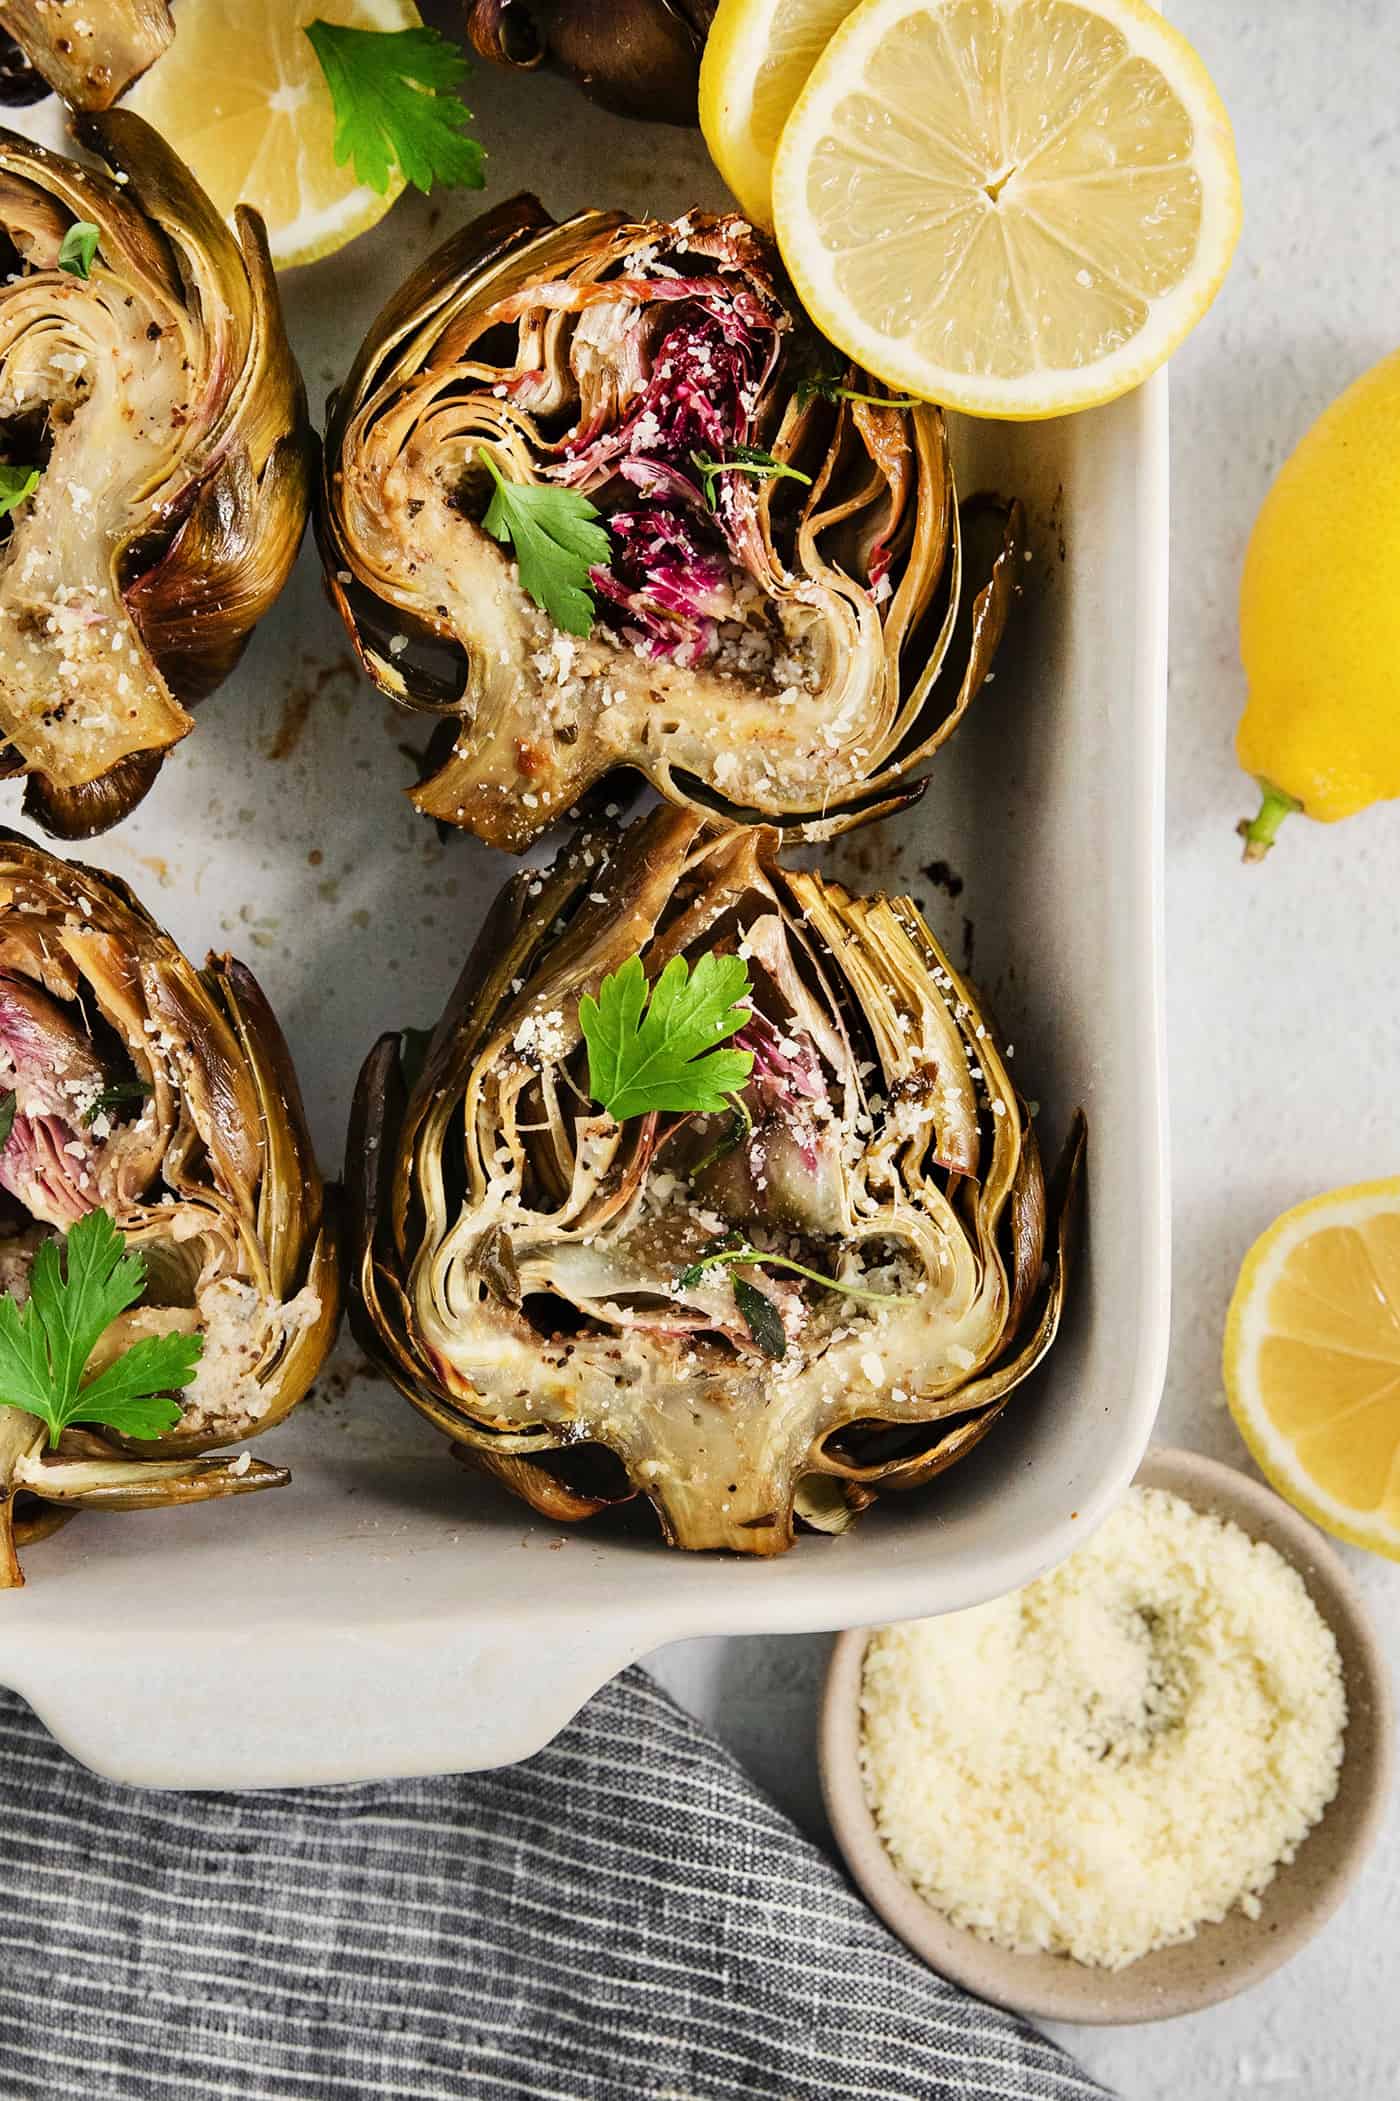 Roasted artichokes are shown close up garnished with parsley and surrounded by lemons.